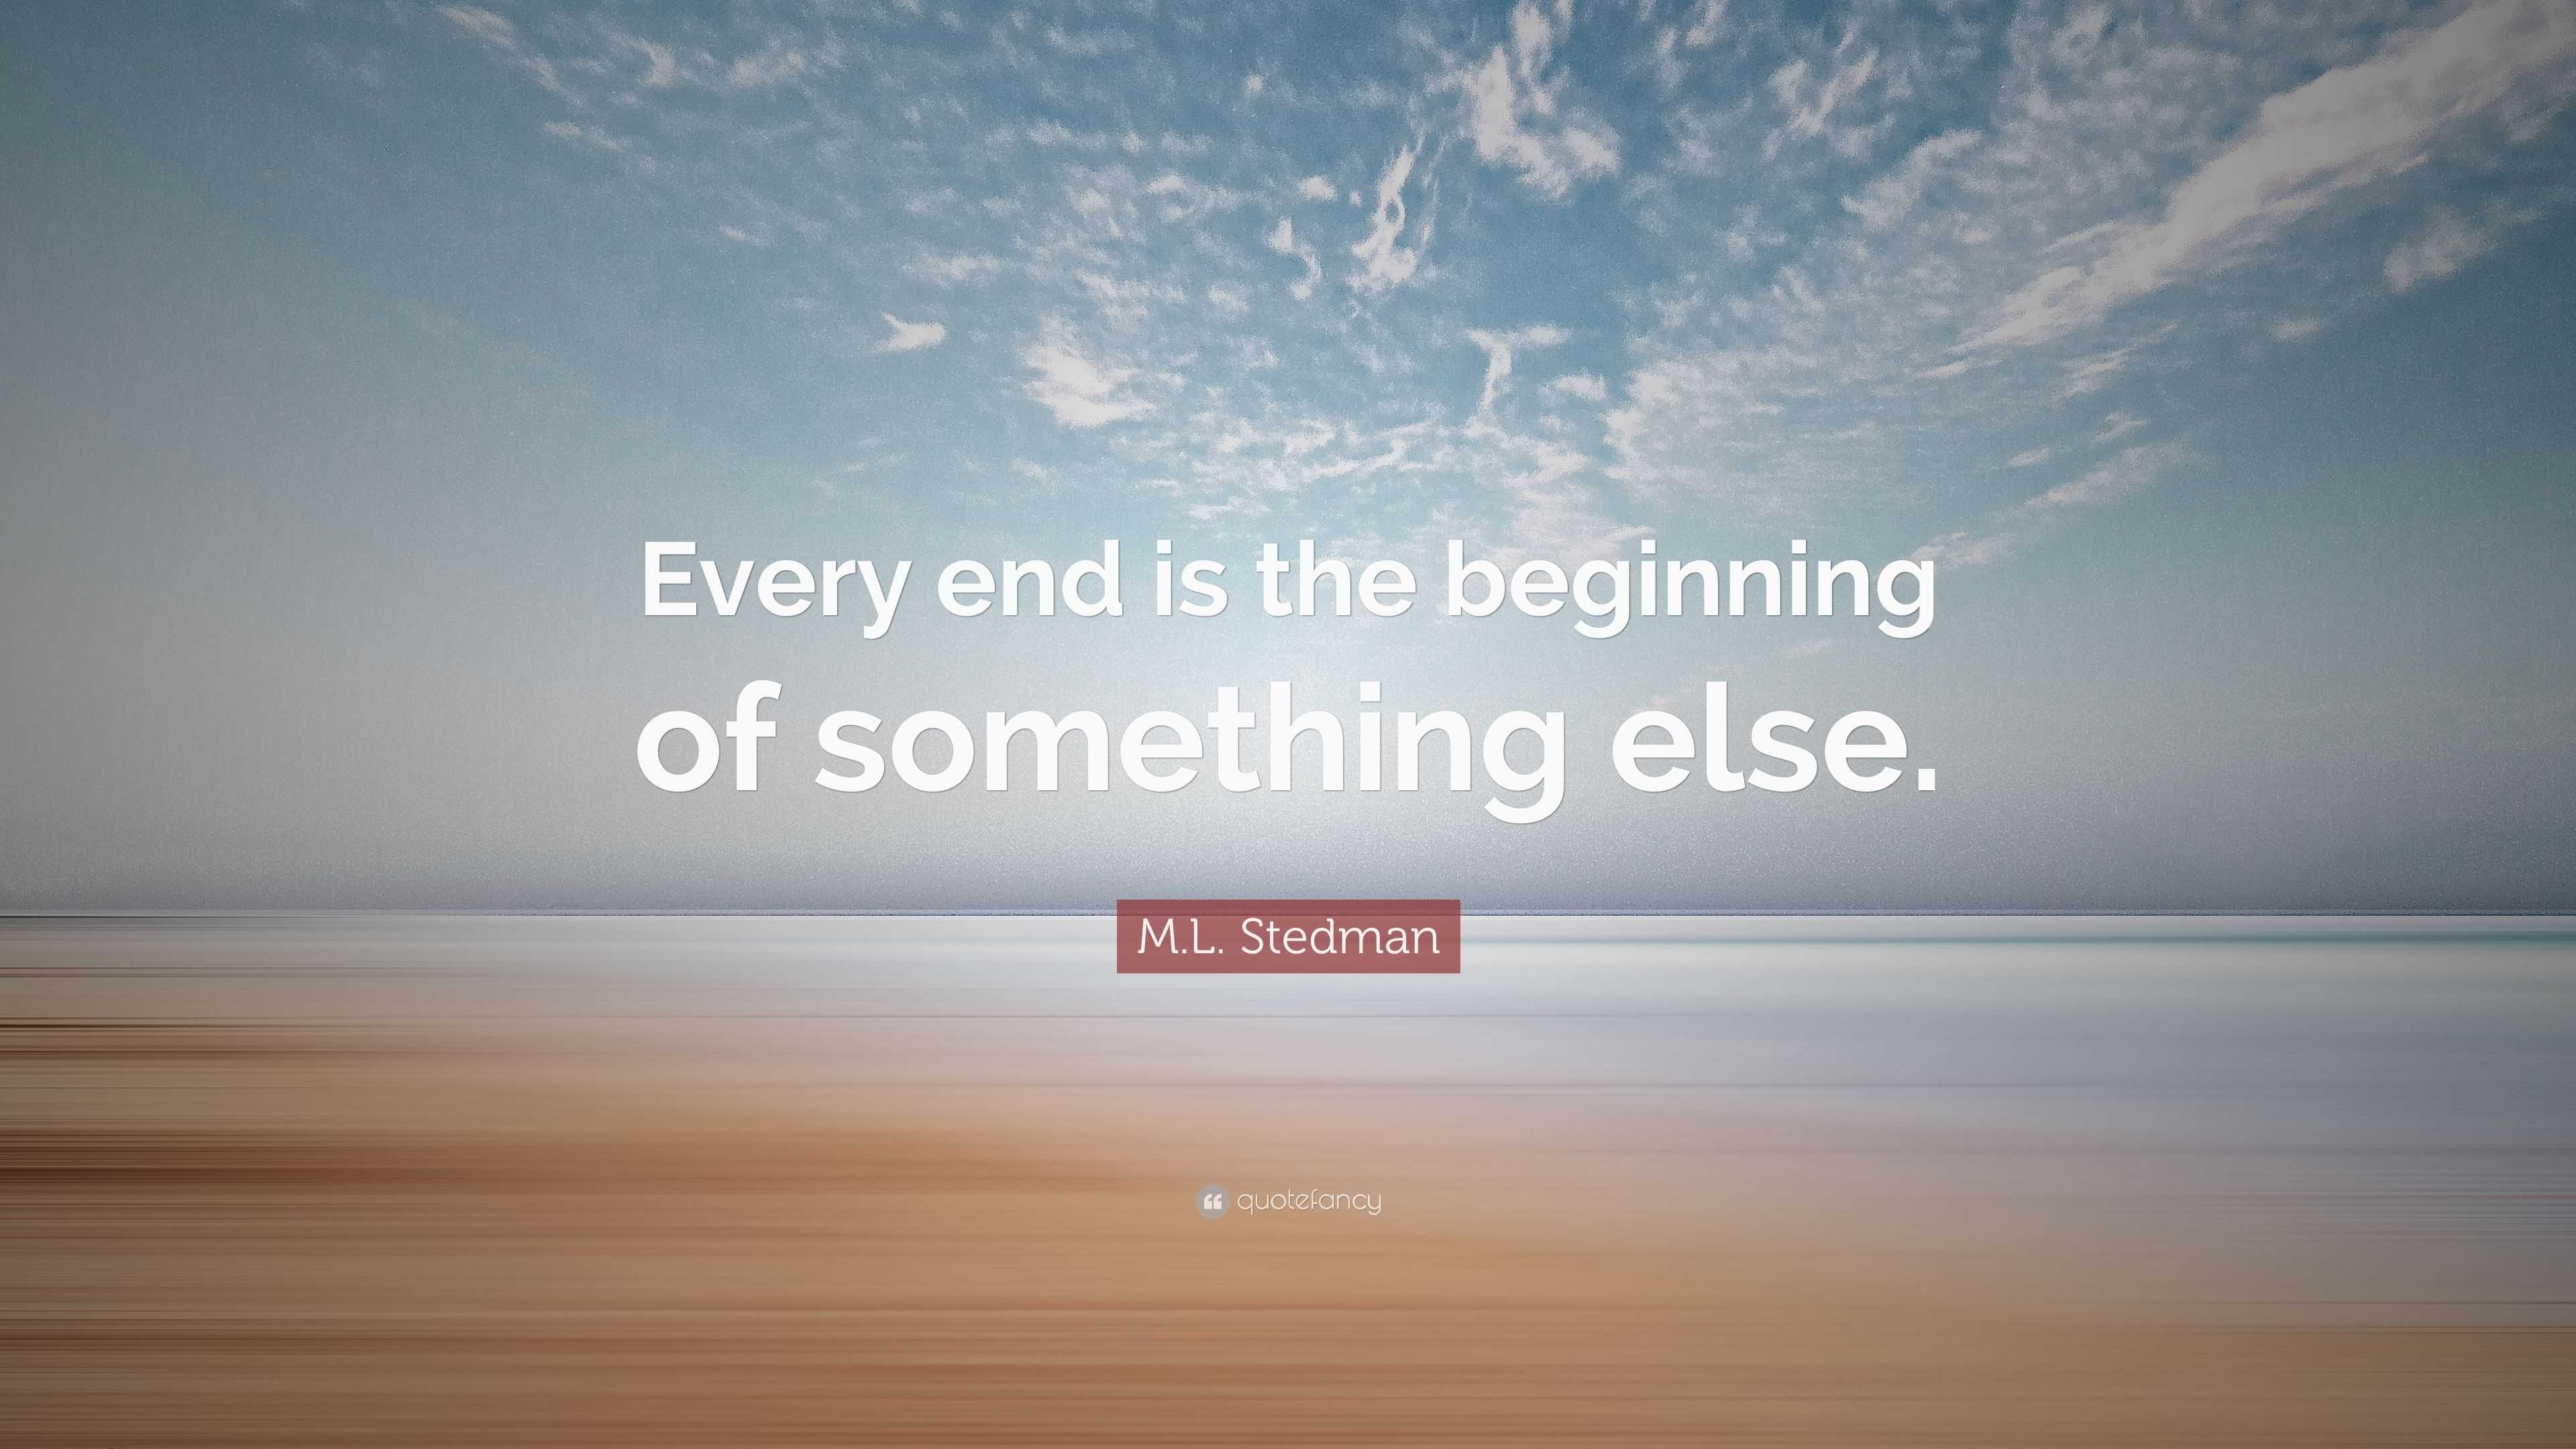 M.L. Stedman Quote: “Every end is the beginning of something else.”